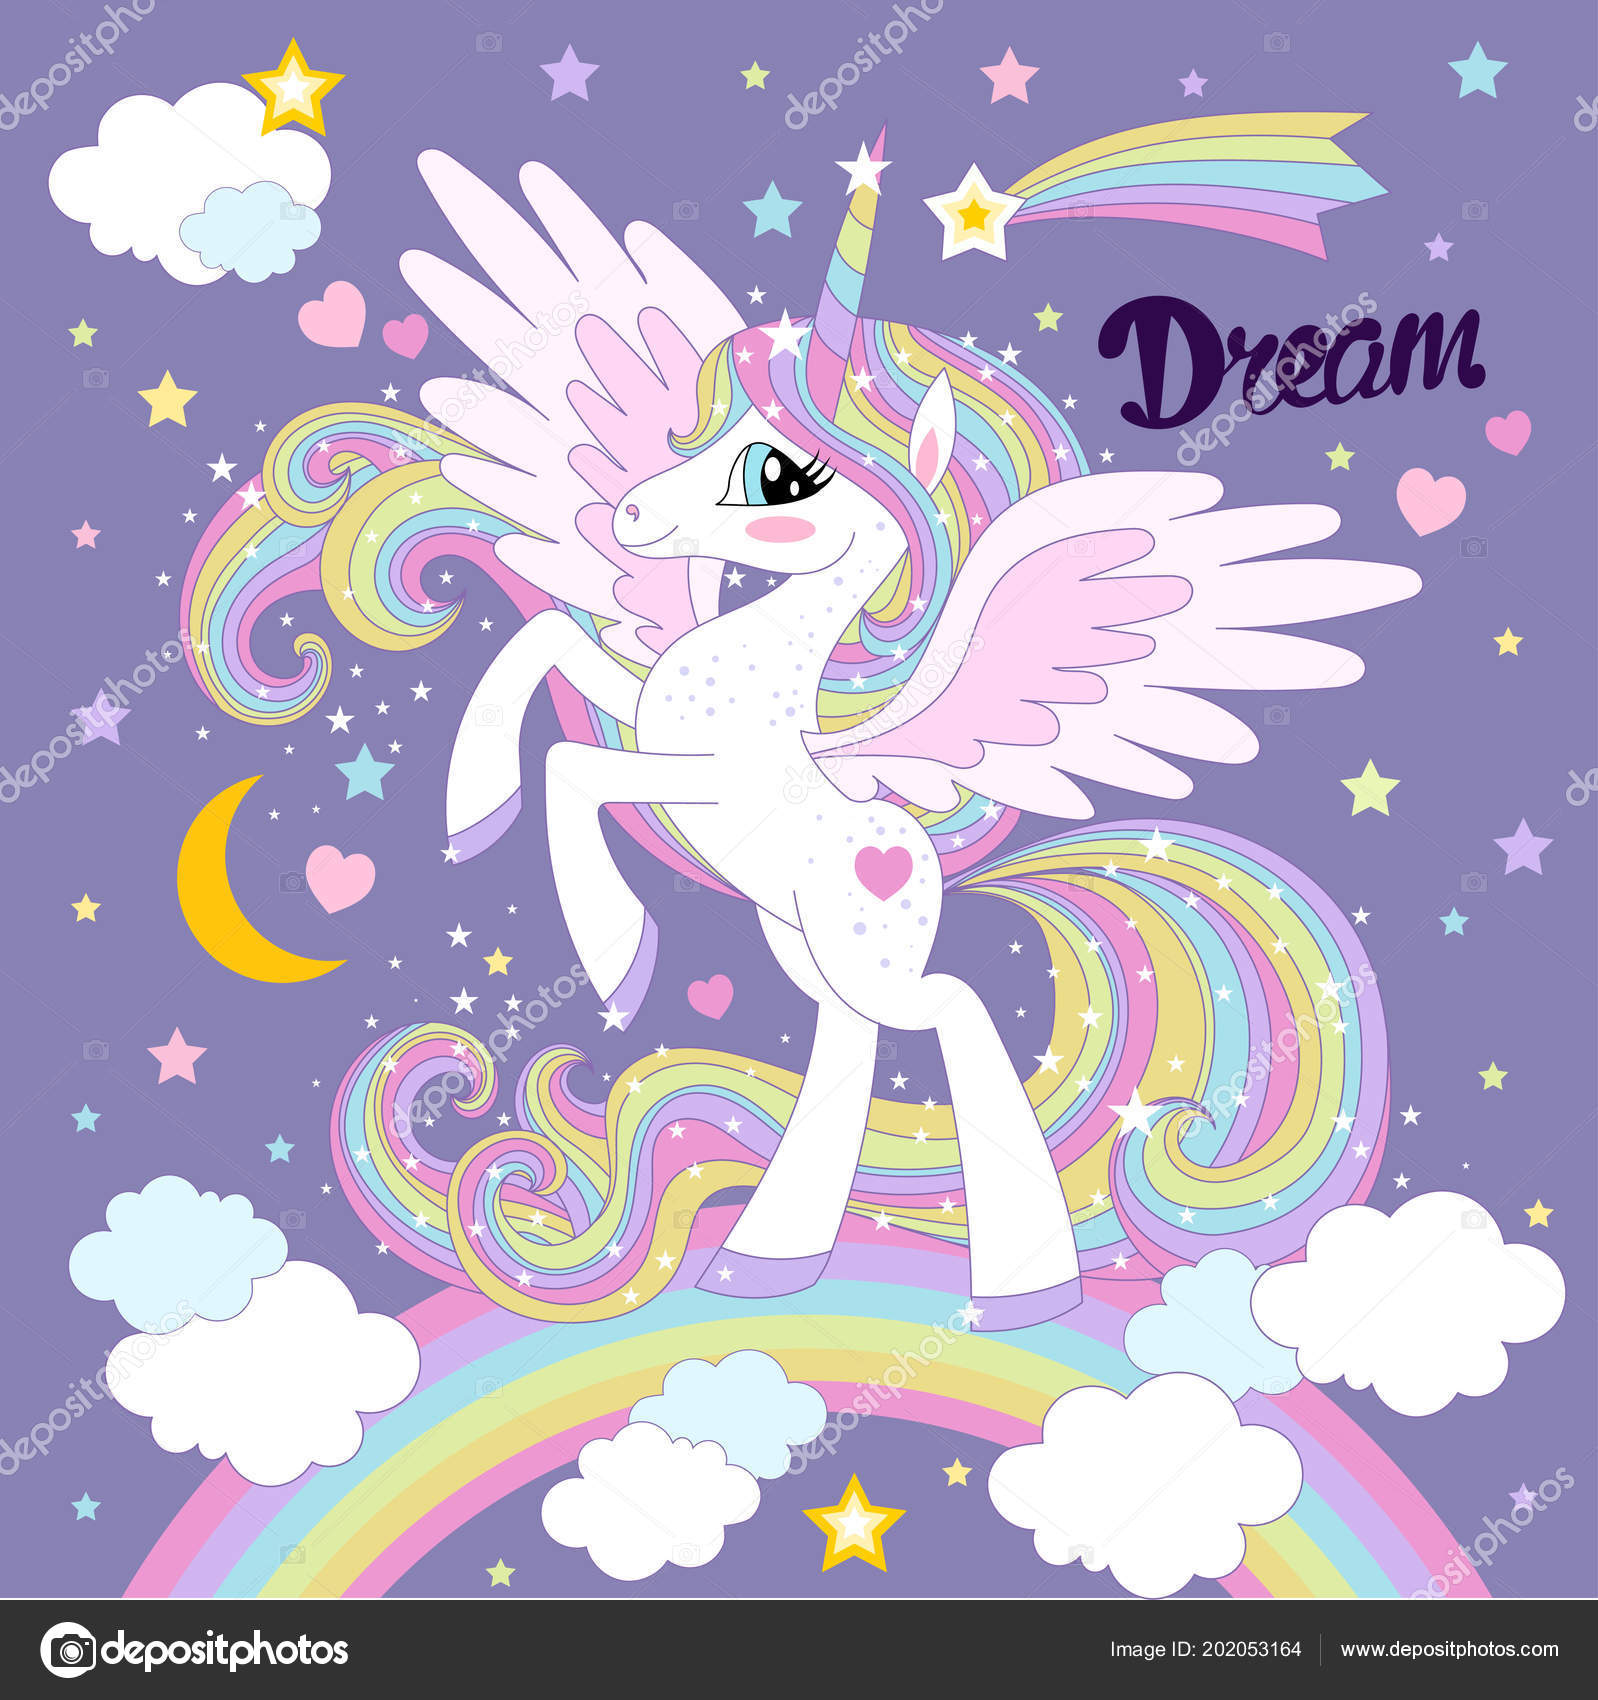 Unicorn With Wings Images Unicorn With Wings Fantasy Square Stickers